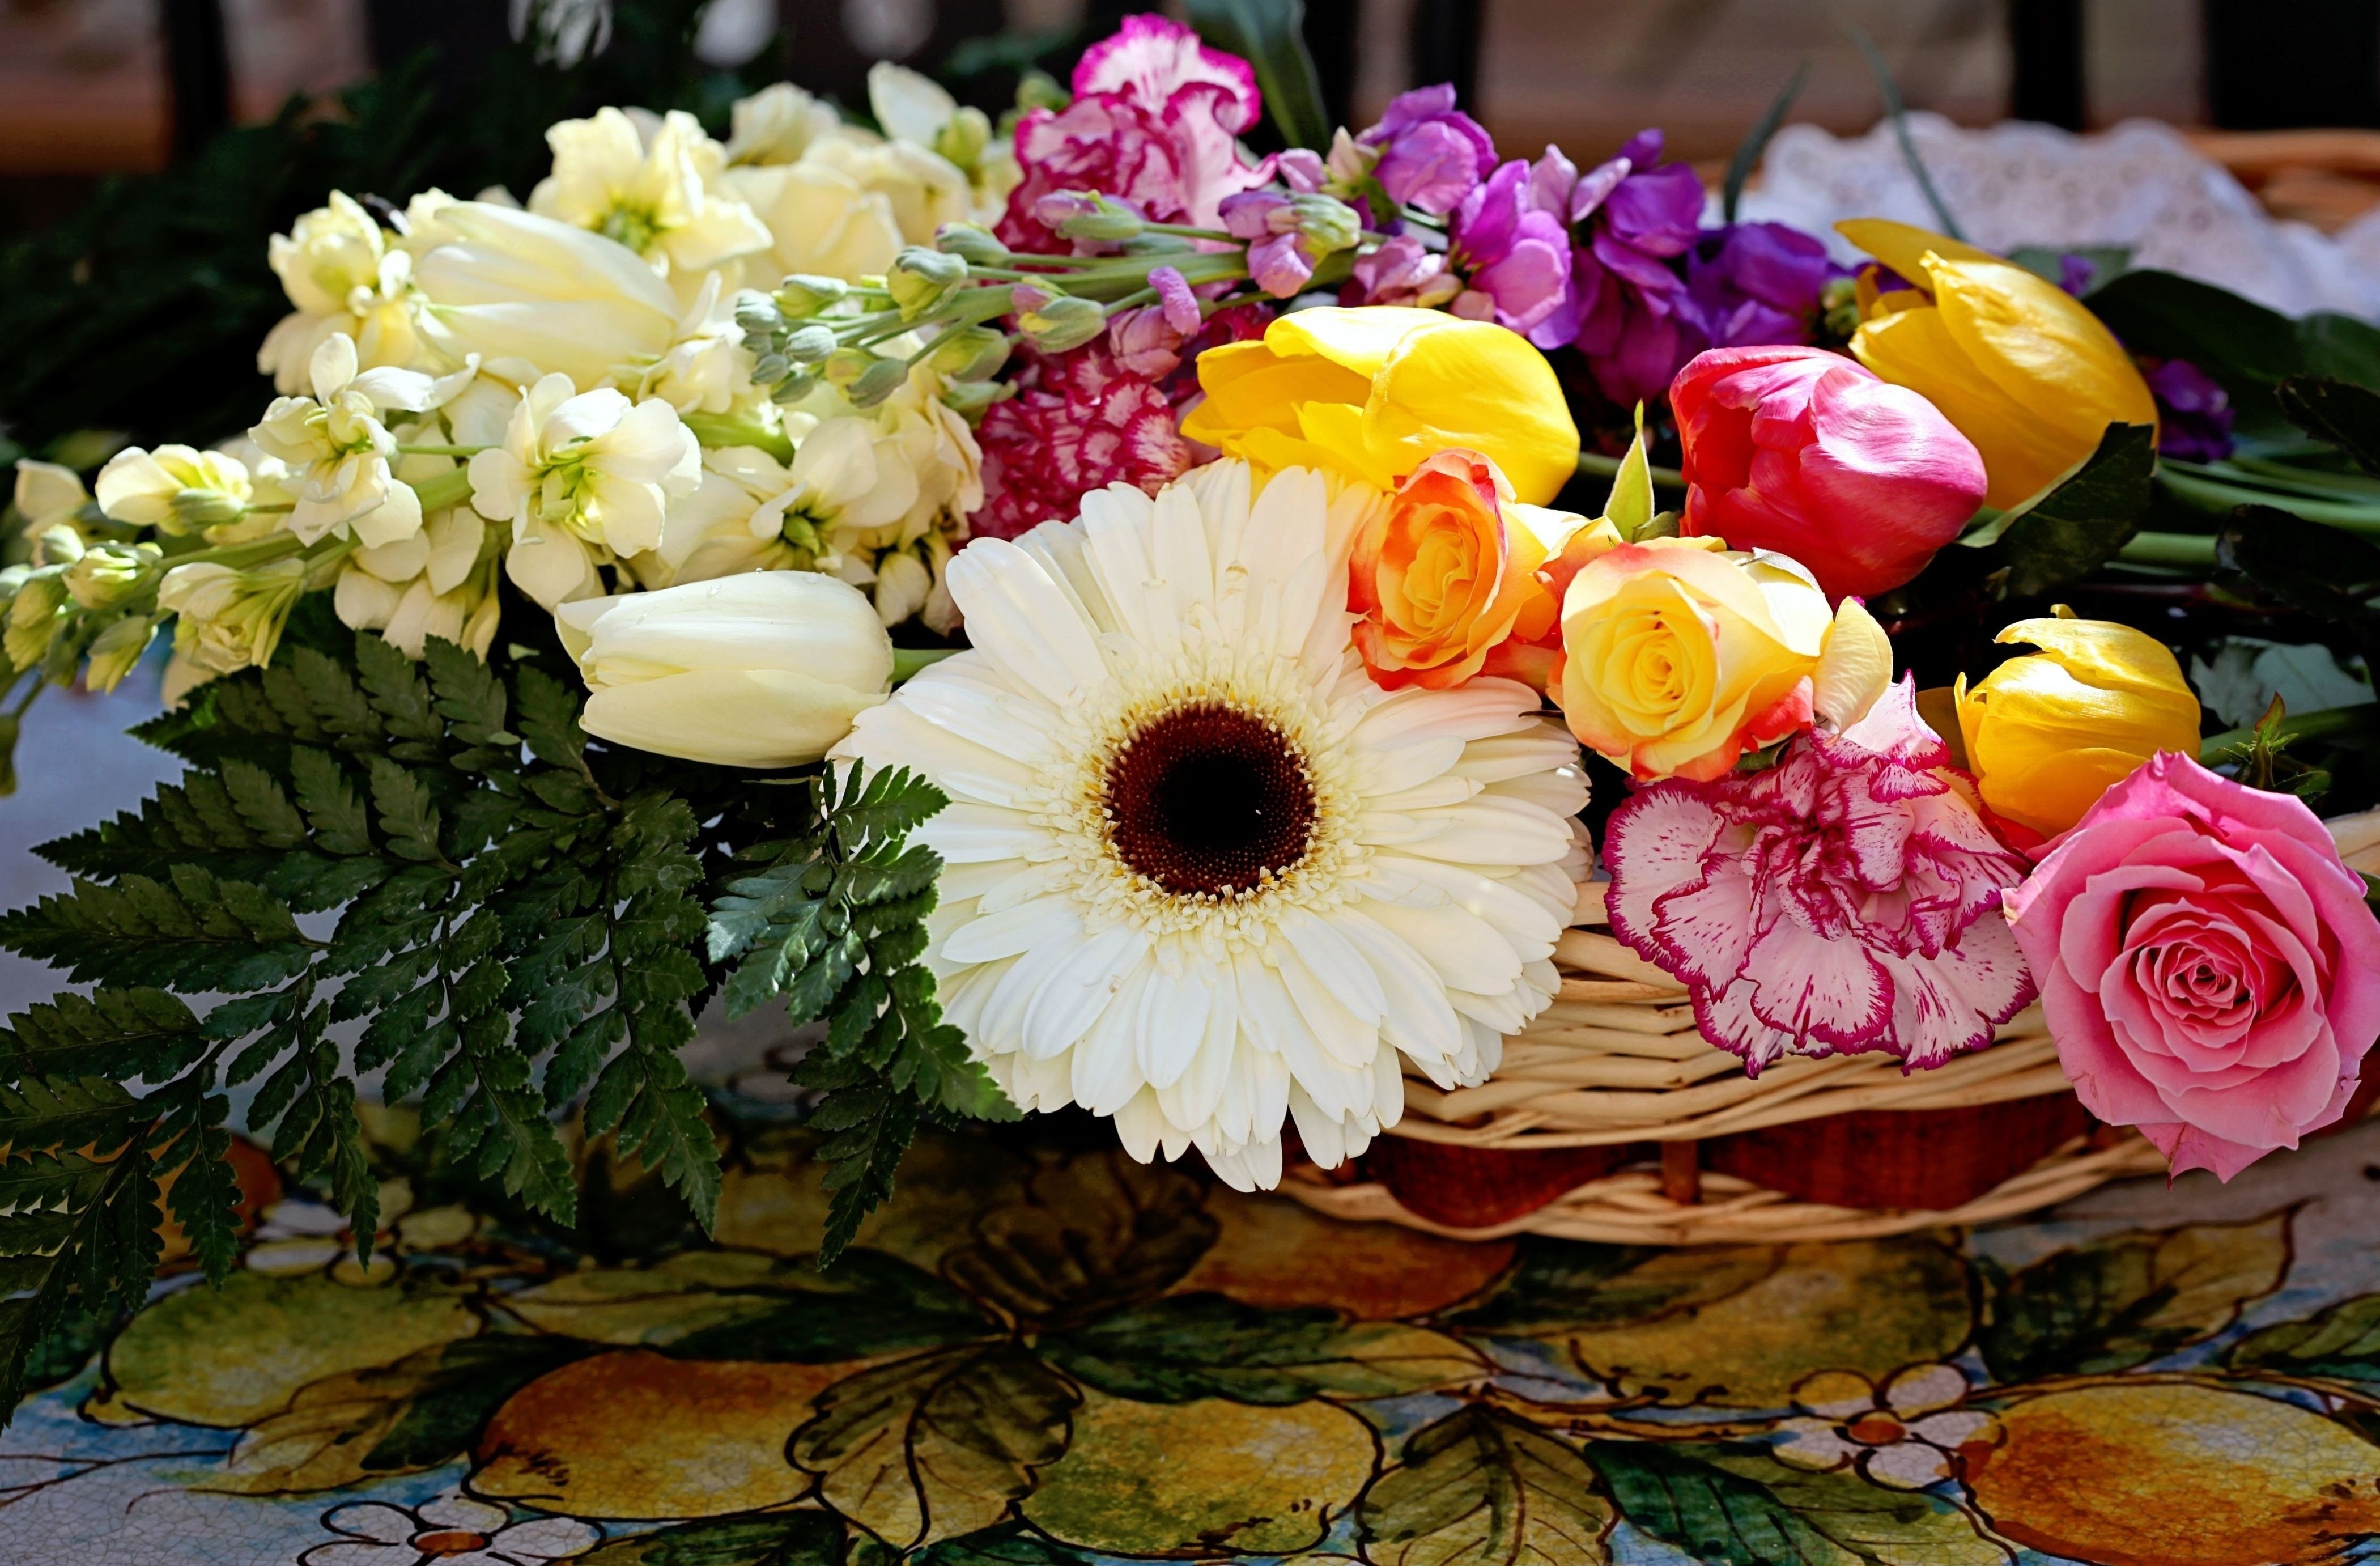 Cool Wallpapers tulips, flowers, roses, carnations, gerberas, basket, composition